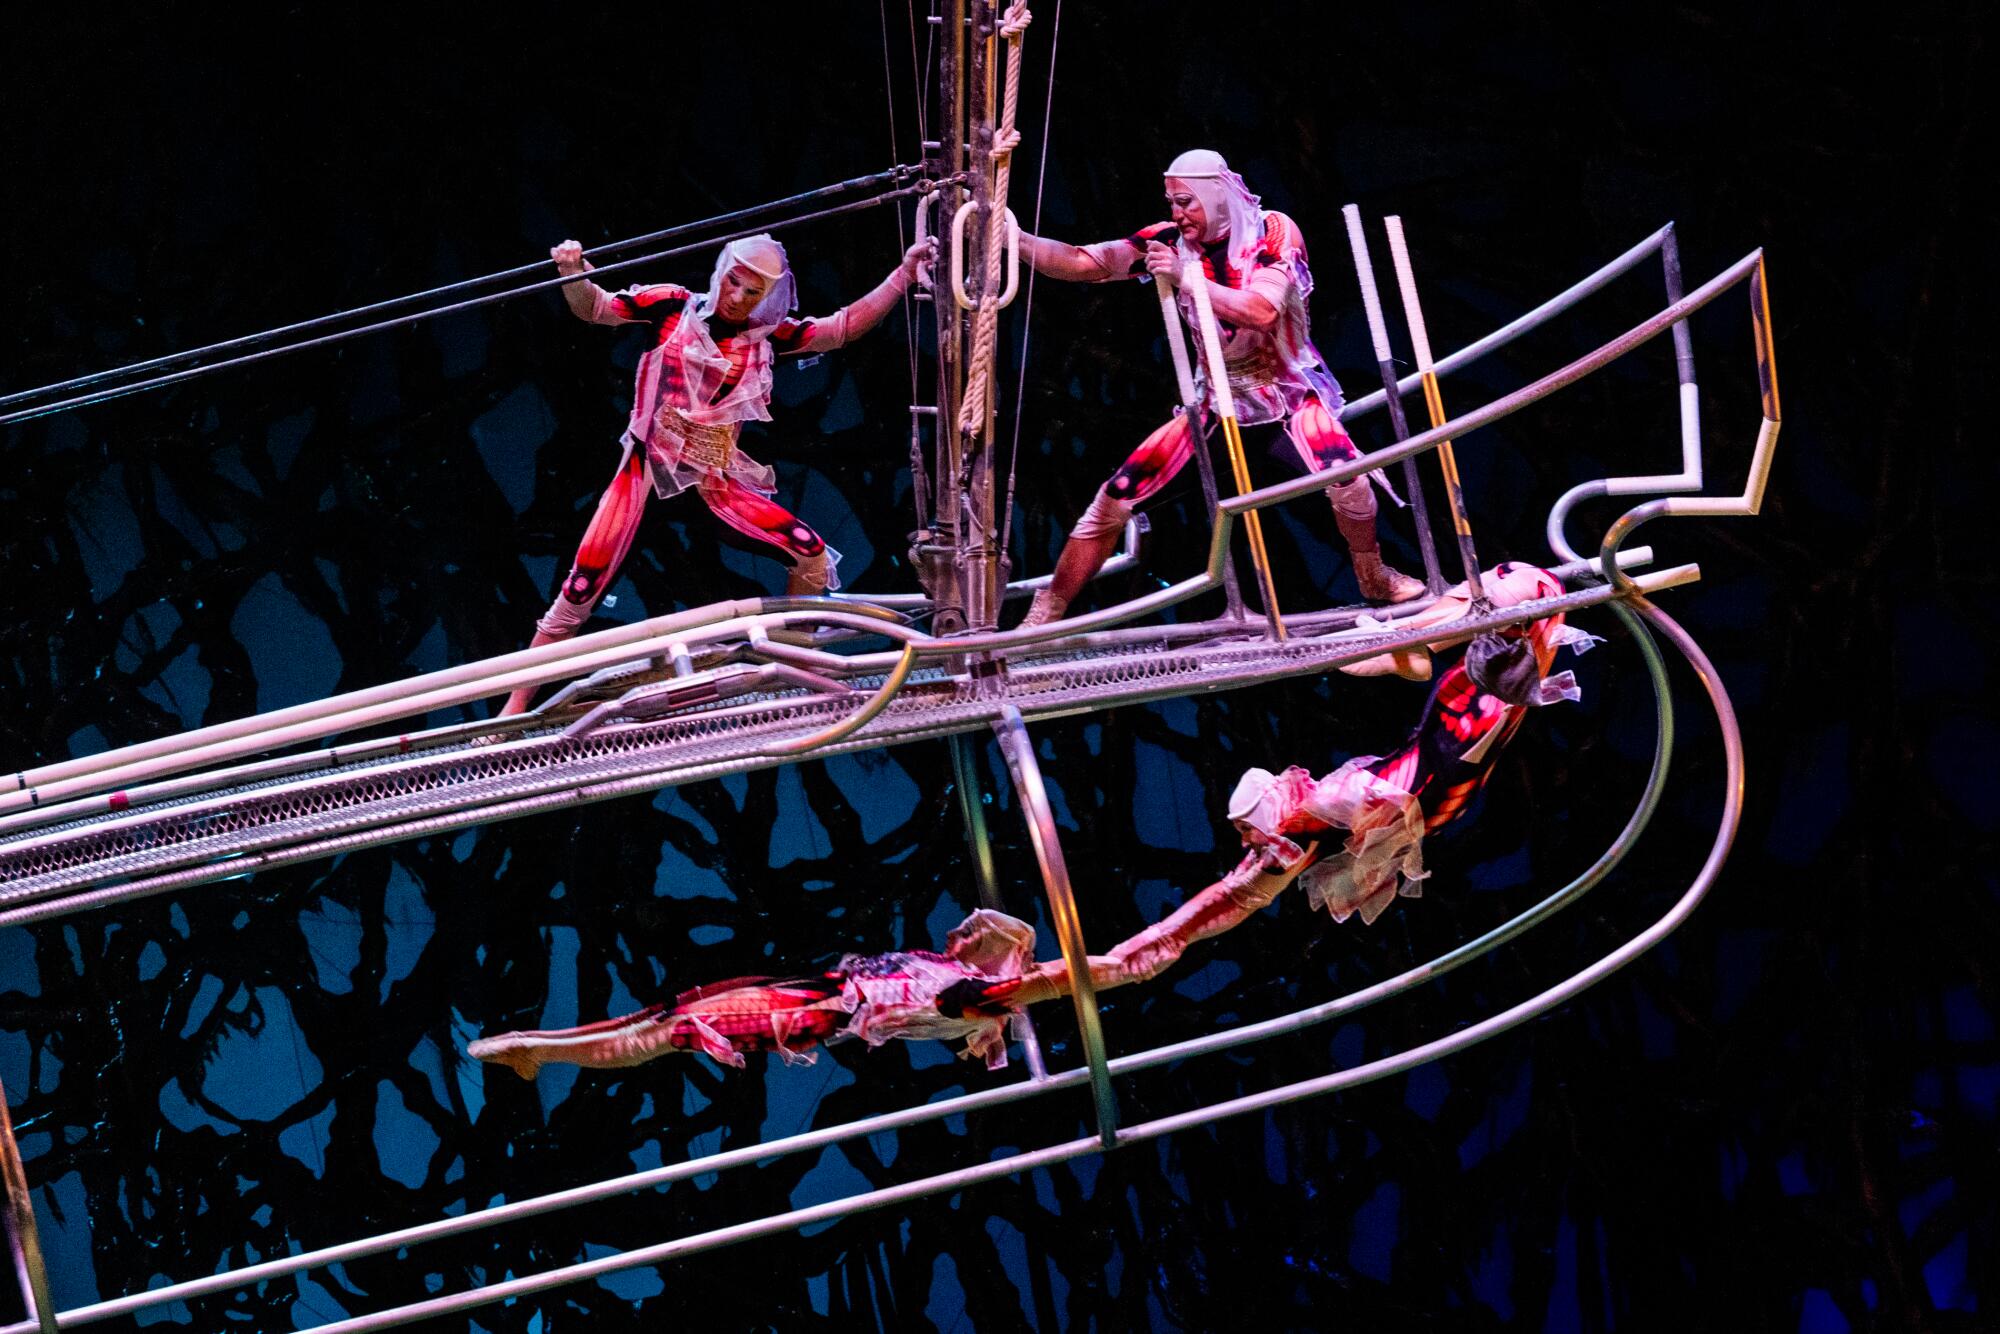 Acrobats perform on an aerial seesaw during Cirque du Soleil's "O."